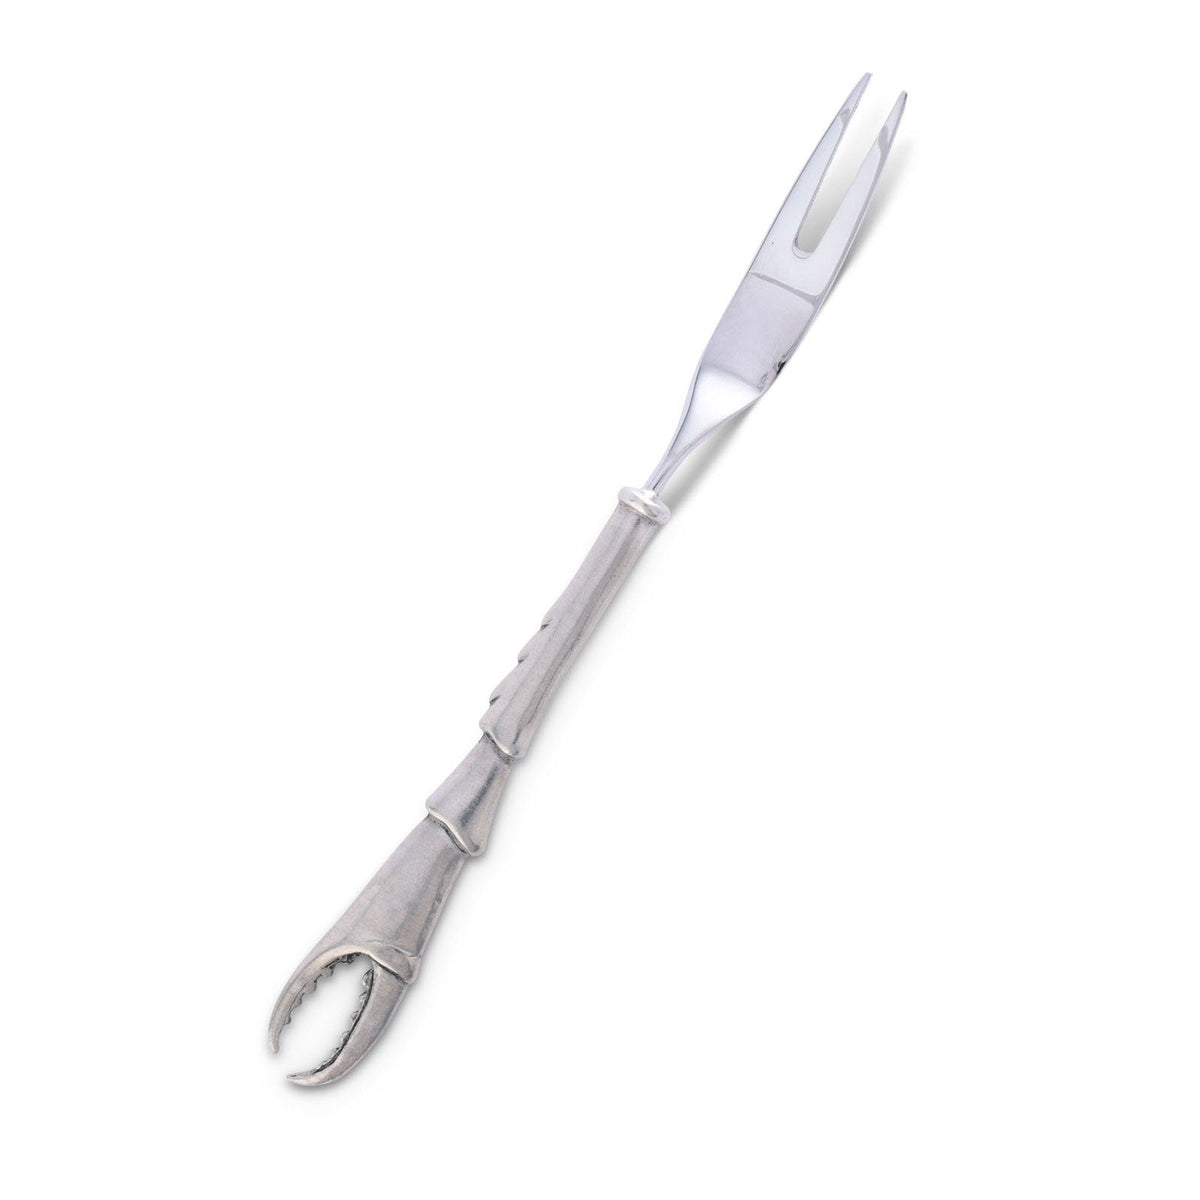 Buy Now The Unique Crab Claw Appetizer Fork Timothy De Clue Collection